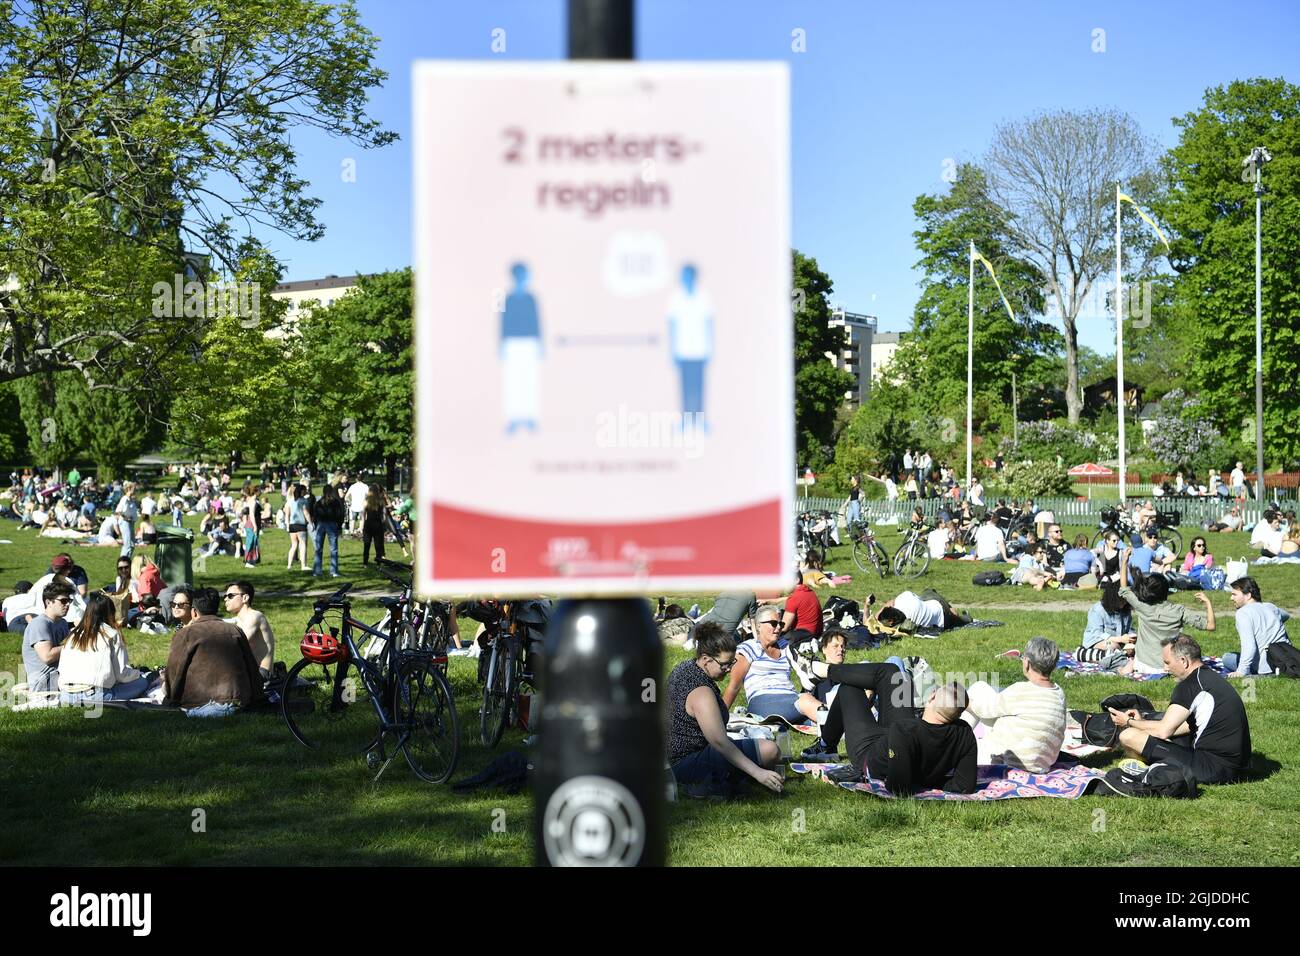 STOCKHOLM 20200530 A lot of people in Tantolunden park on Saturday May 30, 2020 during the corona pandemic. Social distancing or not. Photo: Henrik Montgomery / TT / kod 10060 *SWEDEN OUT*  Stock Photo